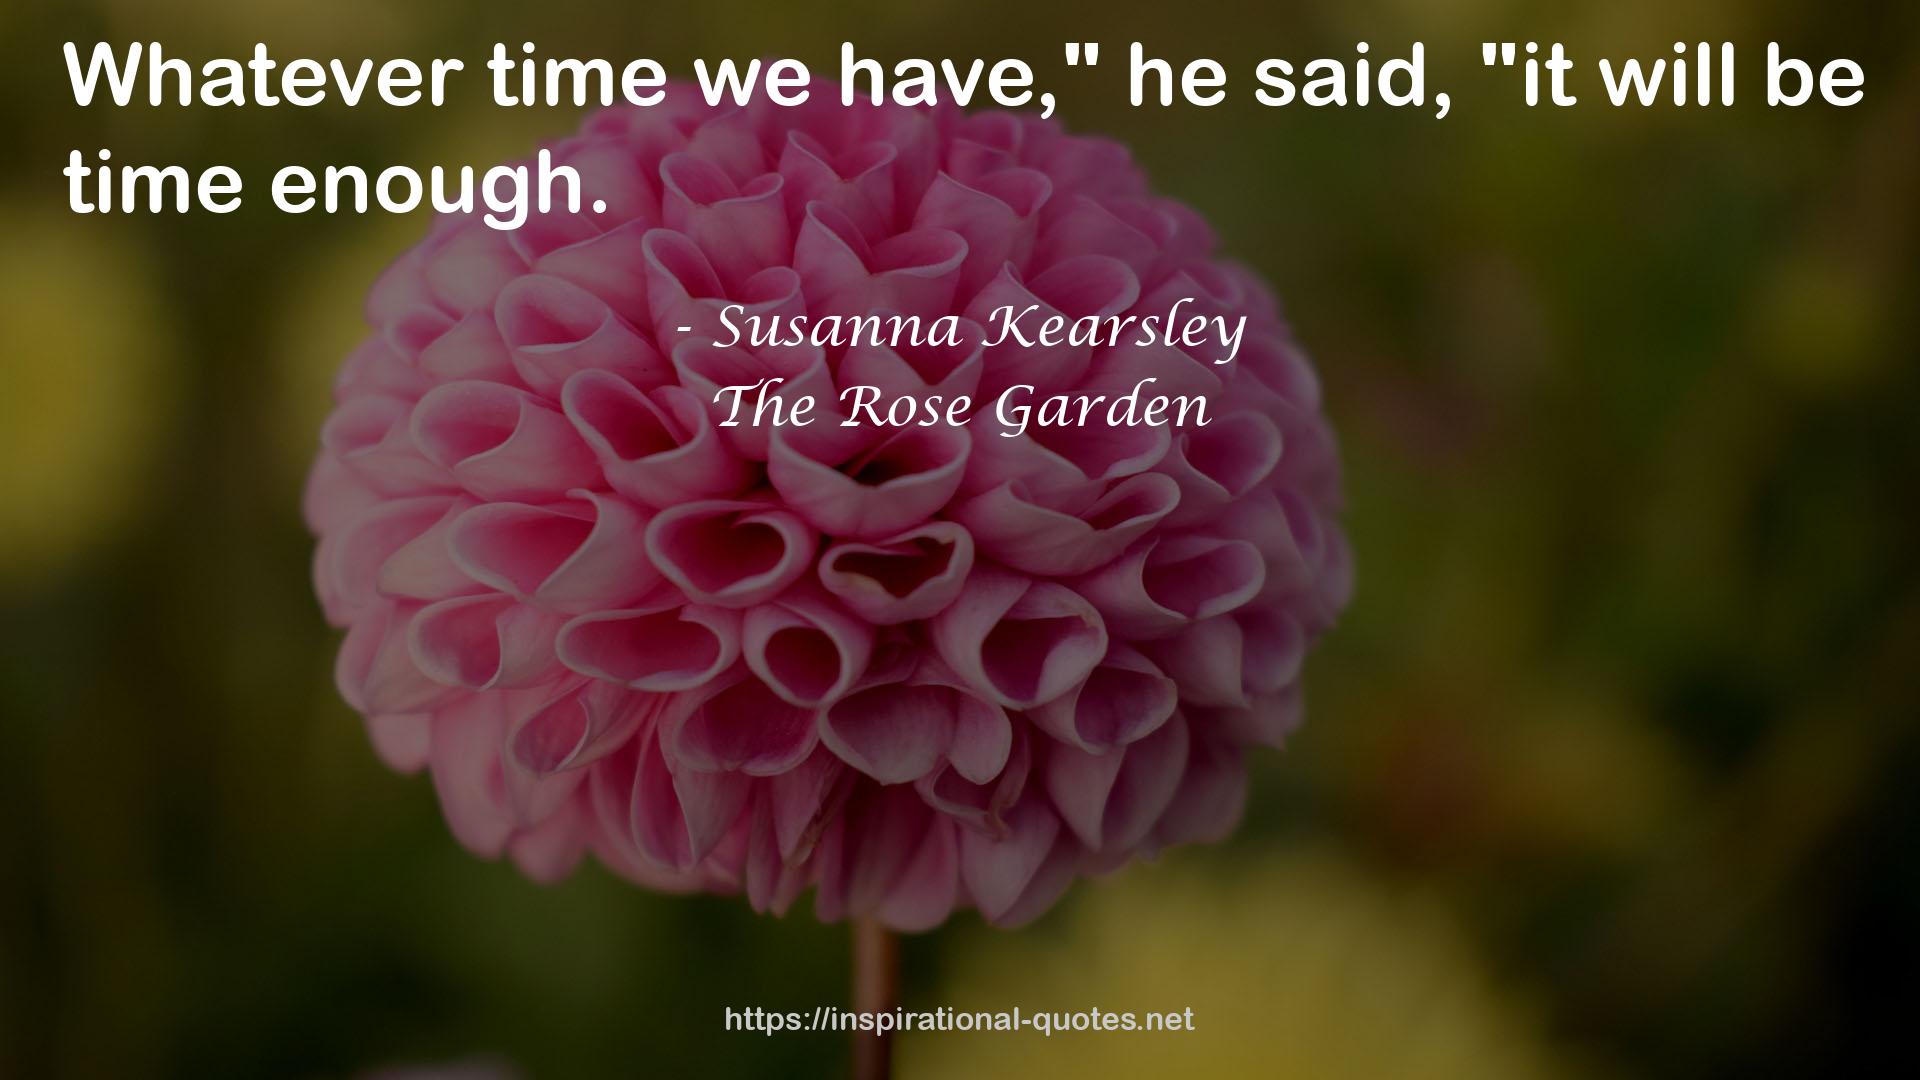 The Rose Garden QUOTES